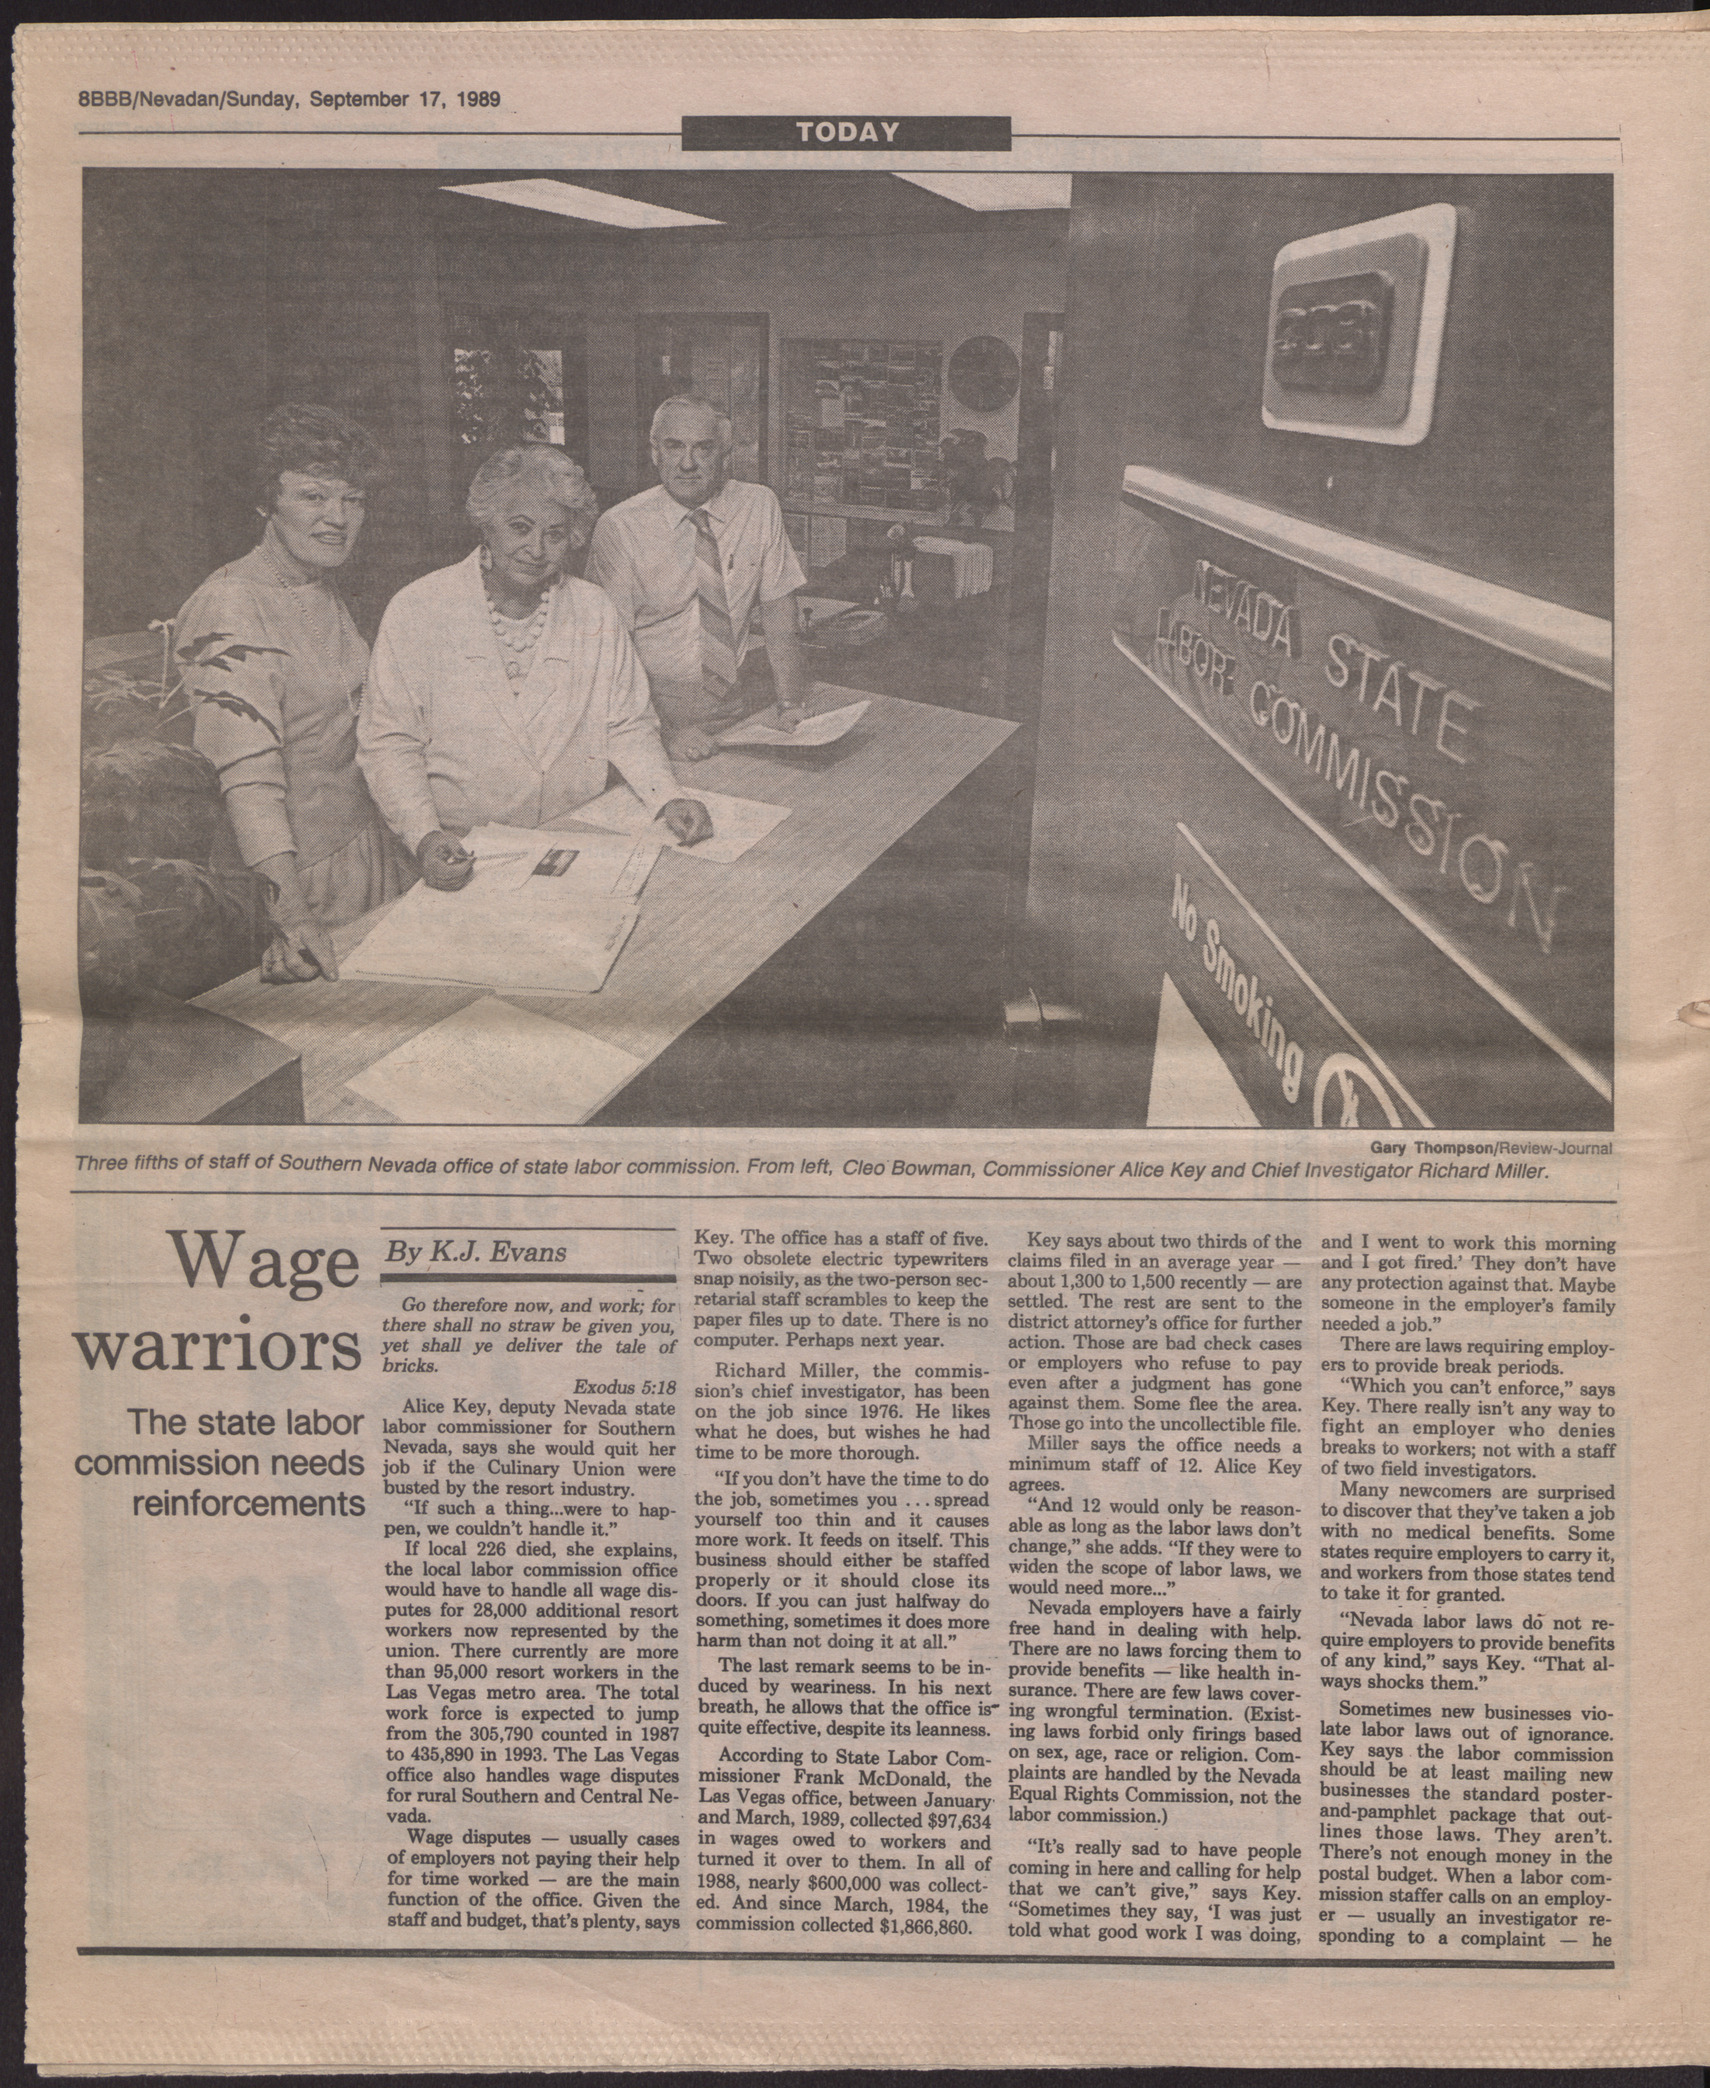 Newspaper clipping, Wage warriors: The state labor commission needs reinforcements, Nevadan Section 8BBB-9BBB, 17BBB, Sunday Magazine of the Las Vegas Review-Journal,  September 17, 1989